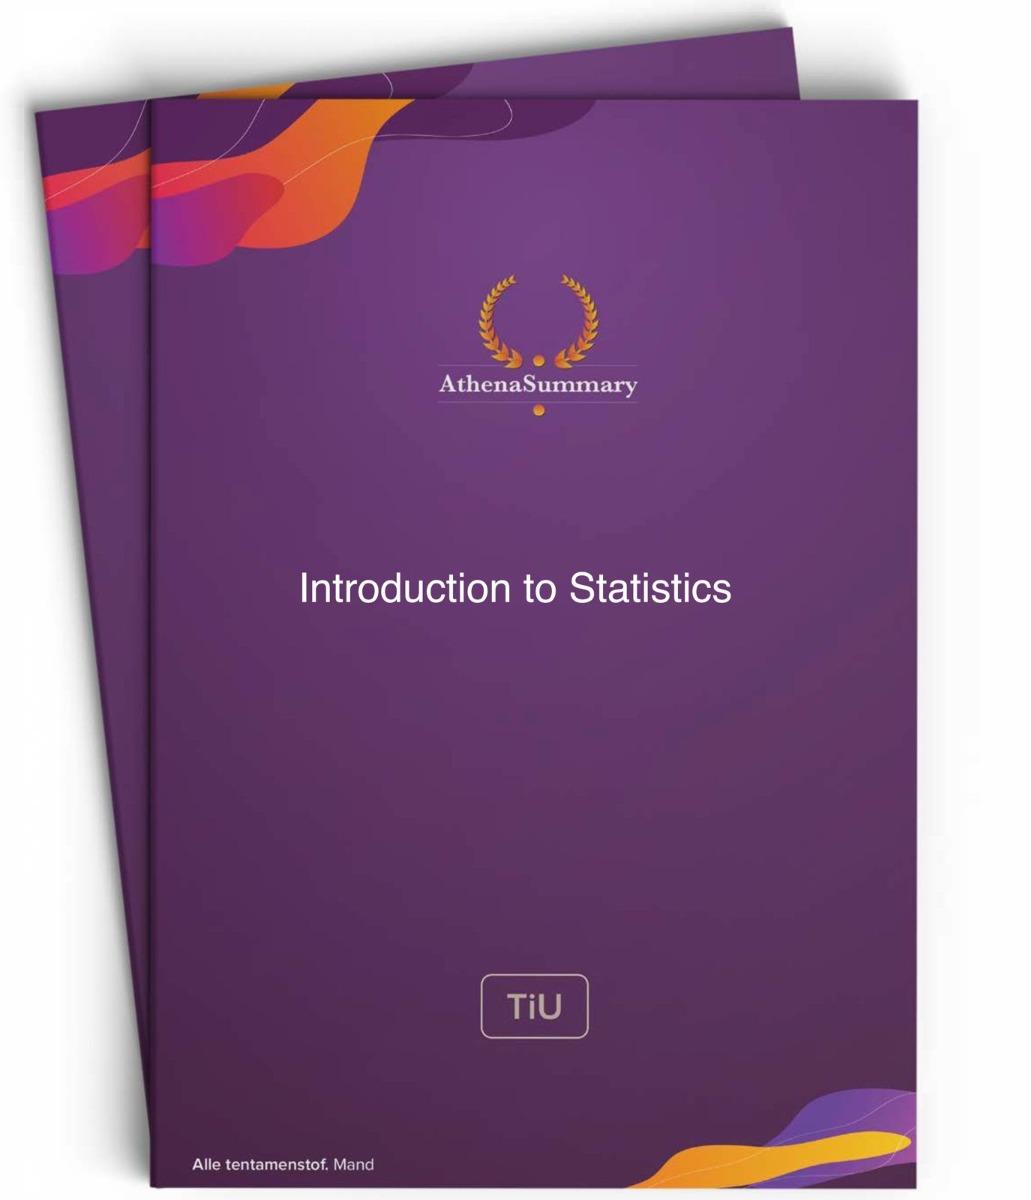 Literature & Lecture Summary: Introduction to Statistics